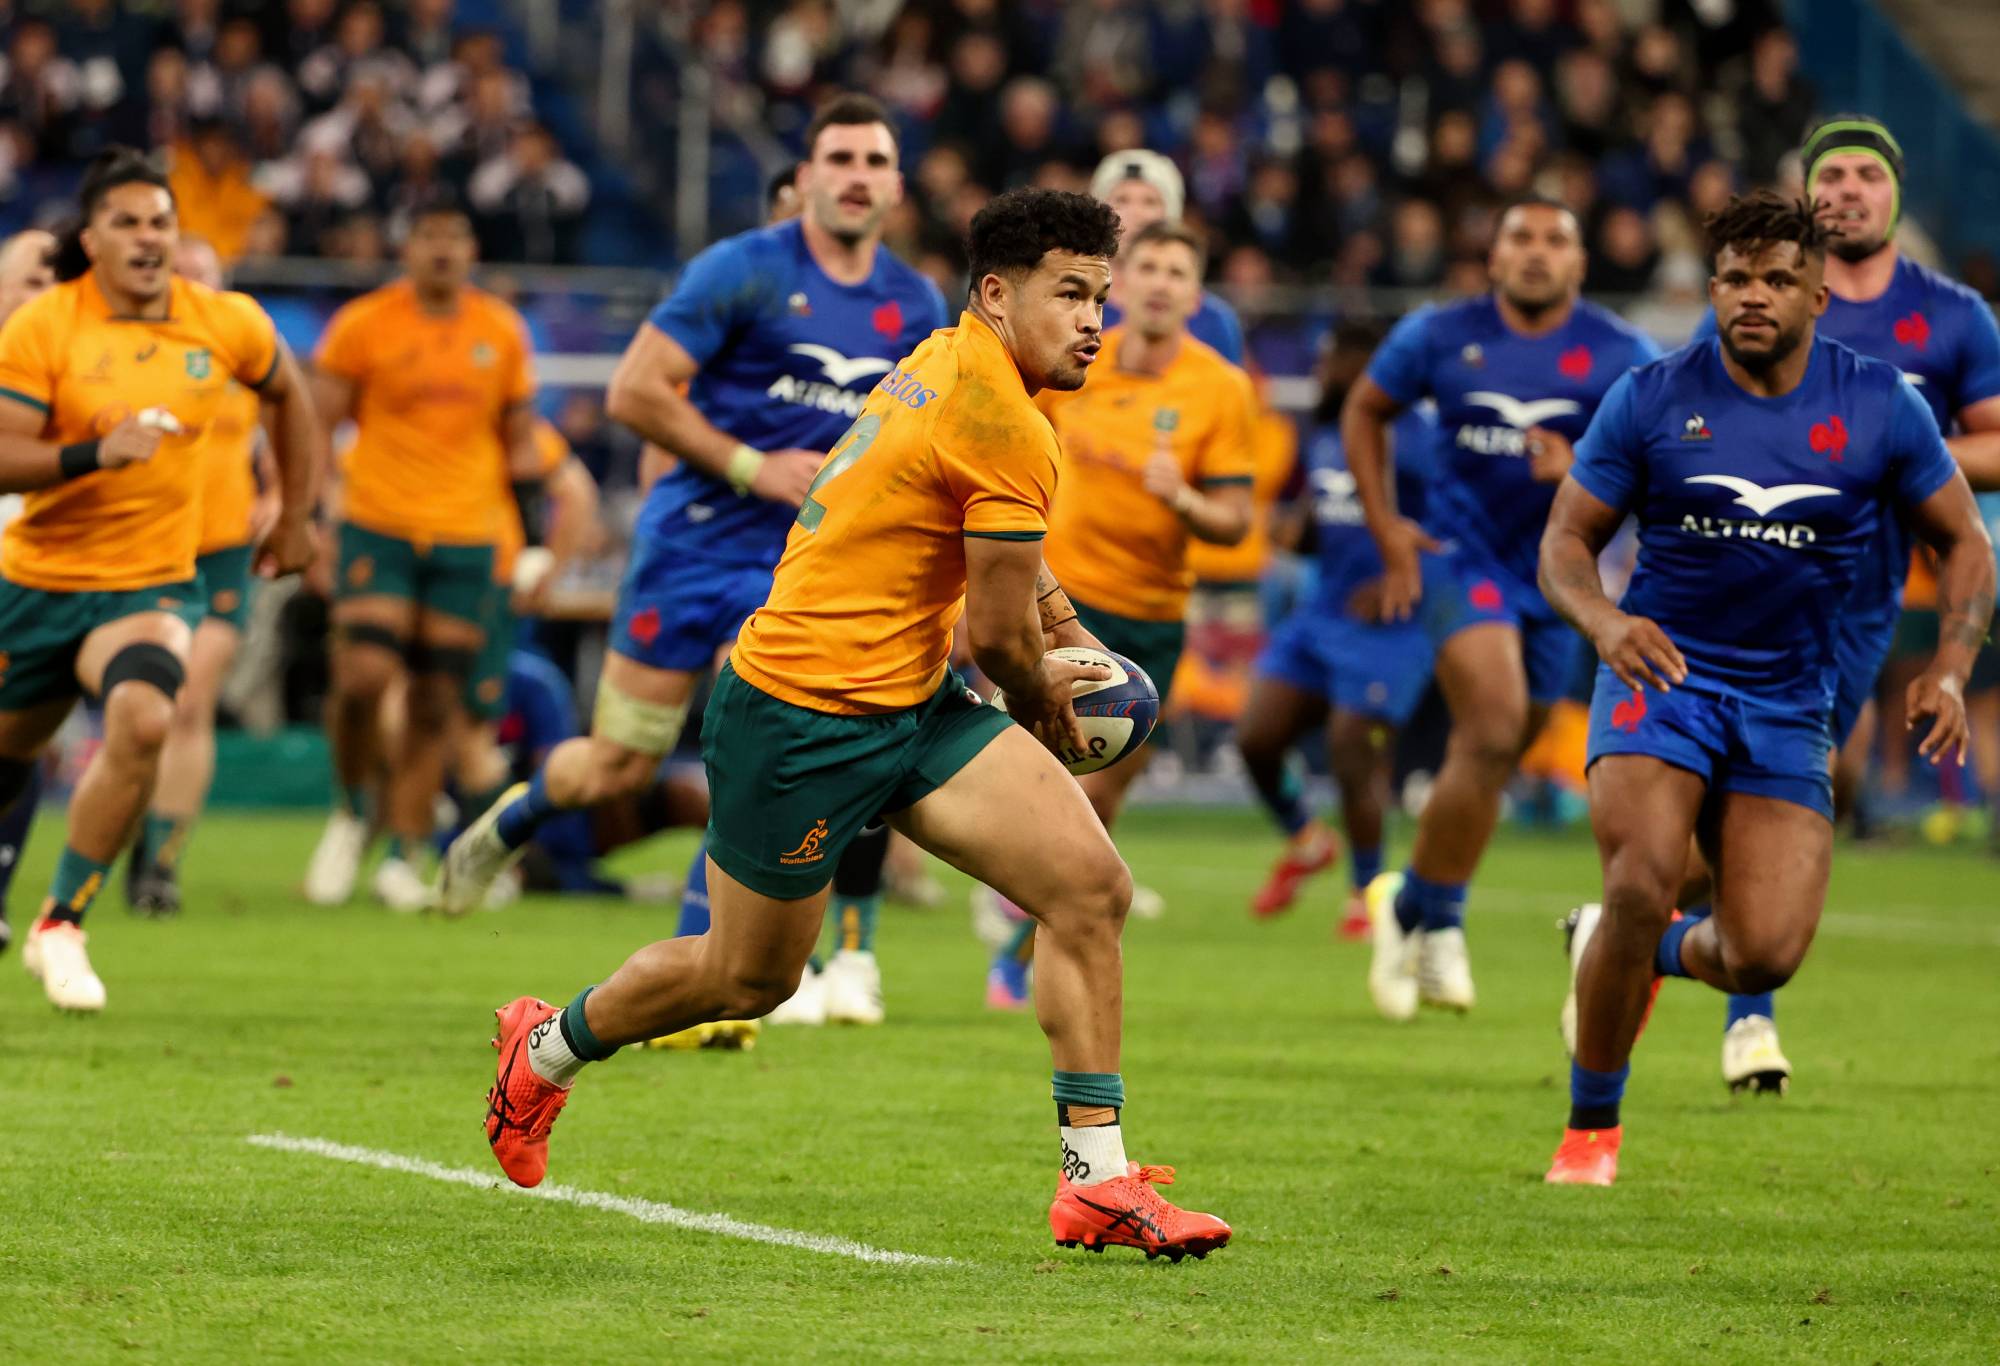 Exclusive: Wallabies star weighing up big move to England